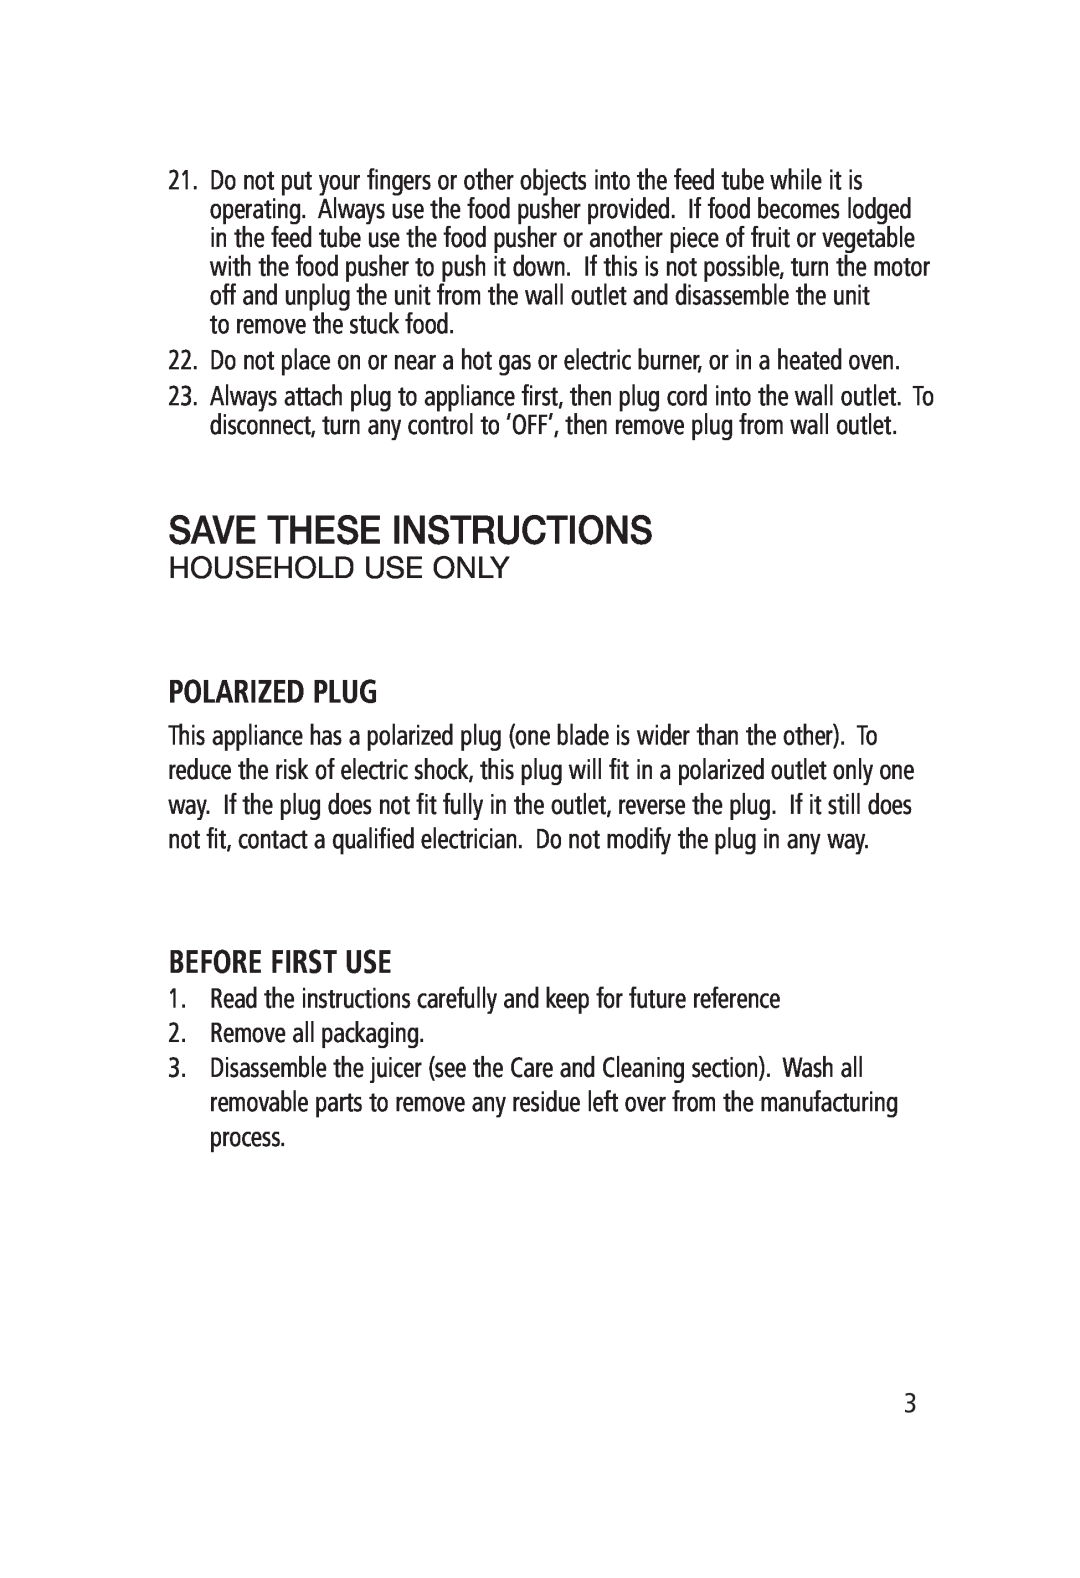 Salton JE-1187 manual Polarized Plug, Before First Use, Save These Instructions, Household Use Only 